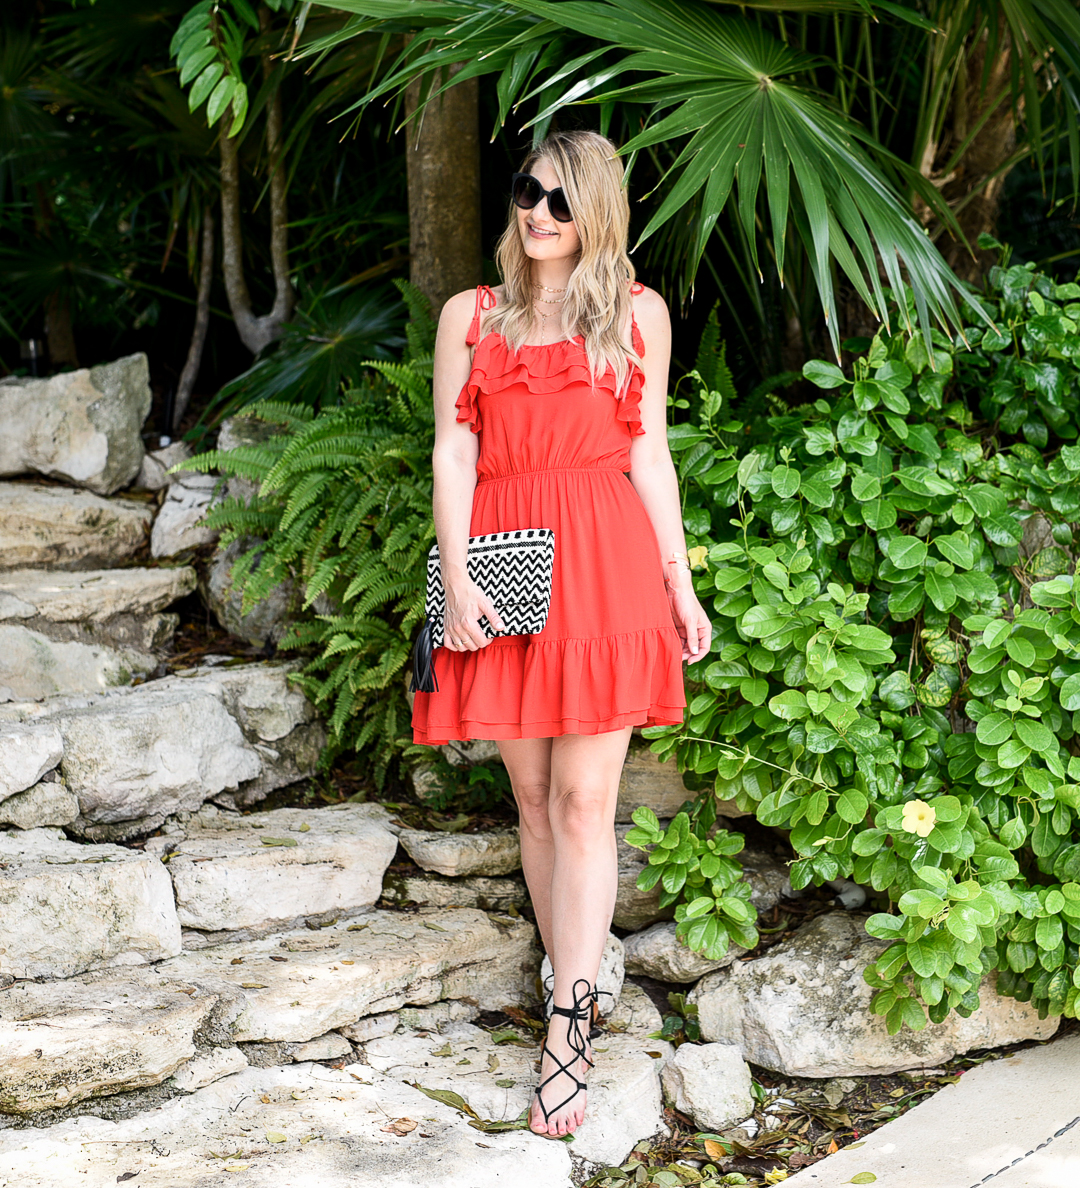 red dress with tassels and ruffles for summer outfit style inspiration